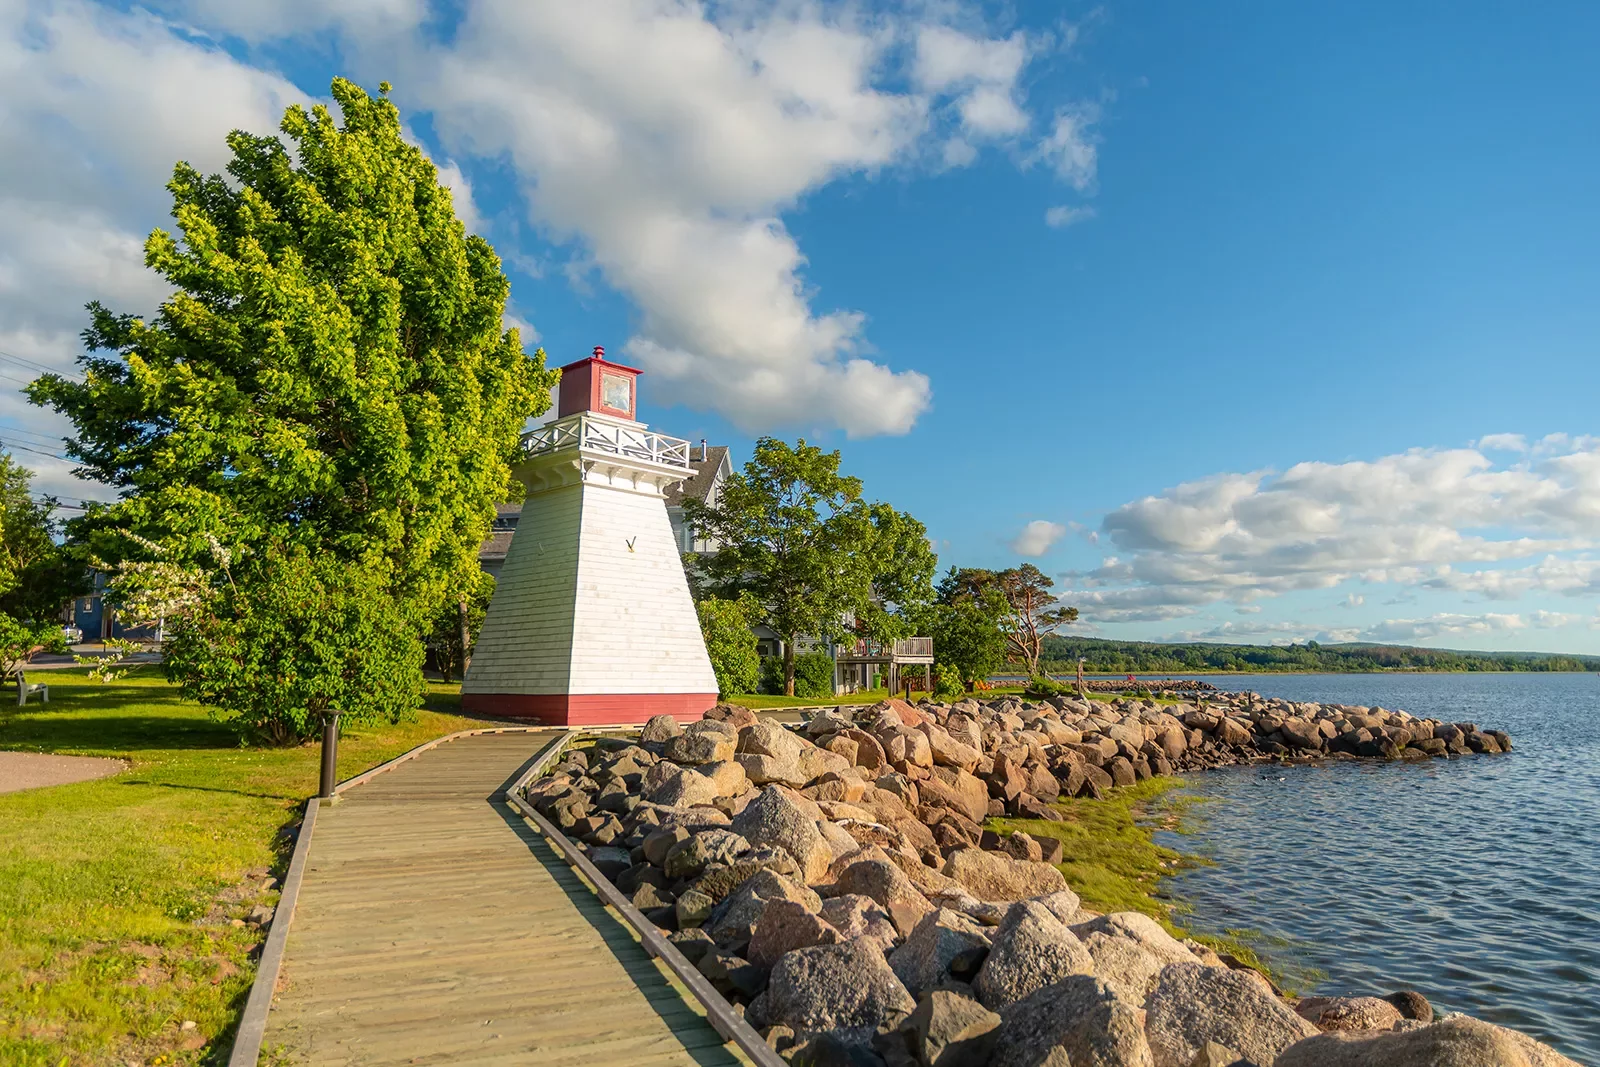 Shot of Canadian coastline, small red lighthouse.